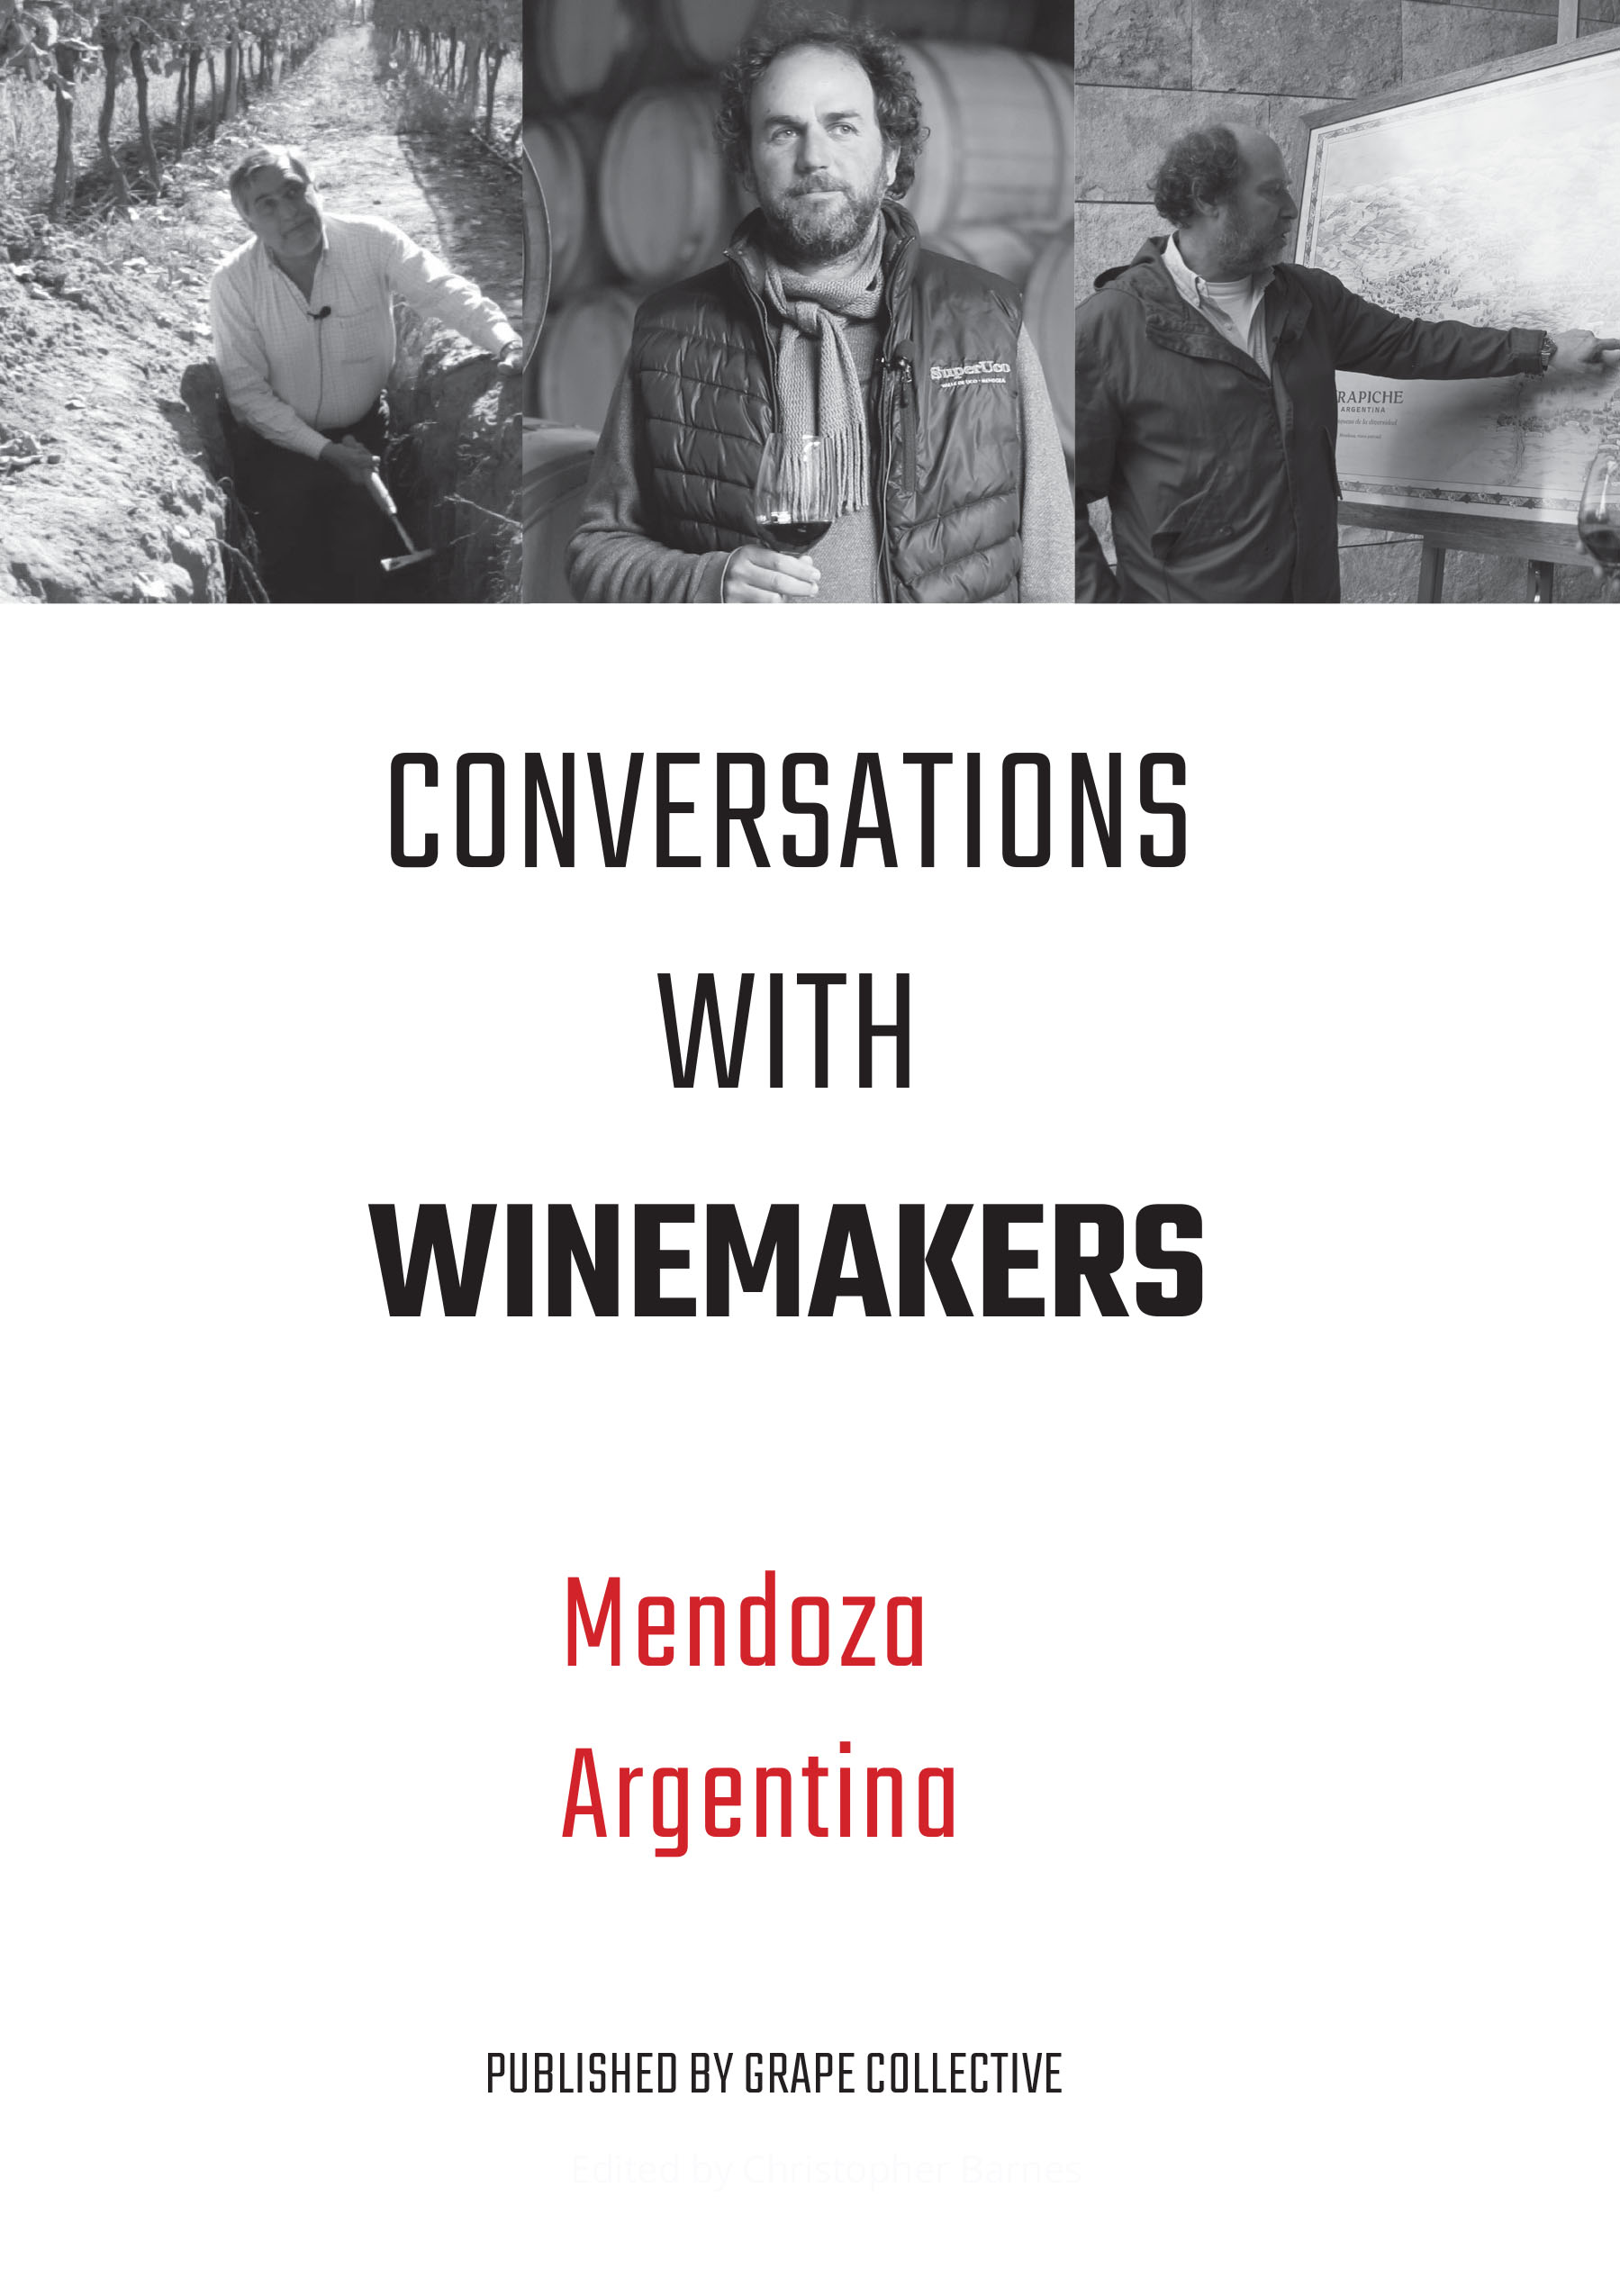 Conversations with winemakers